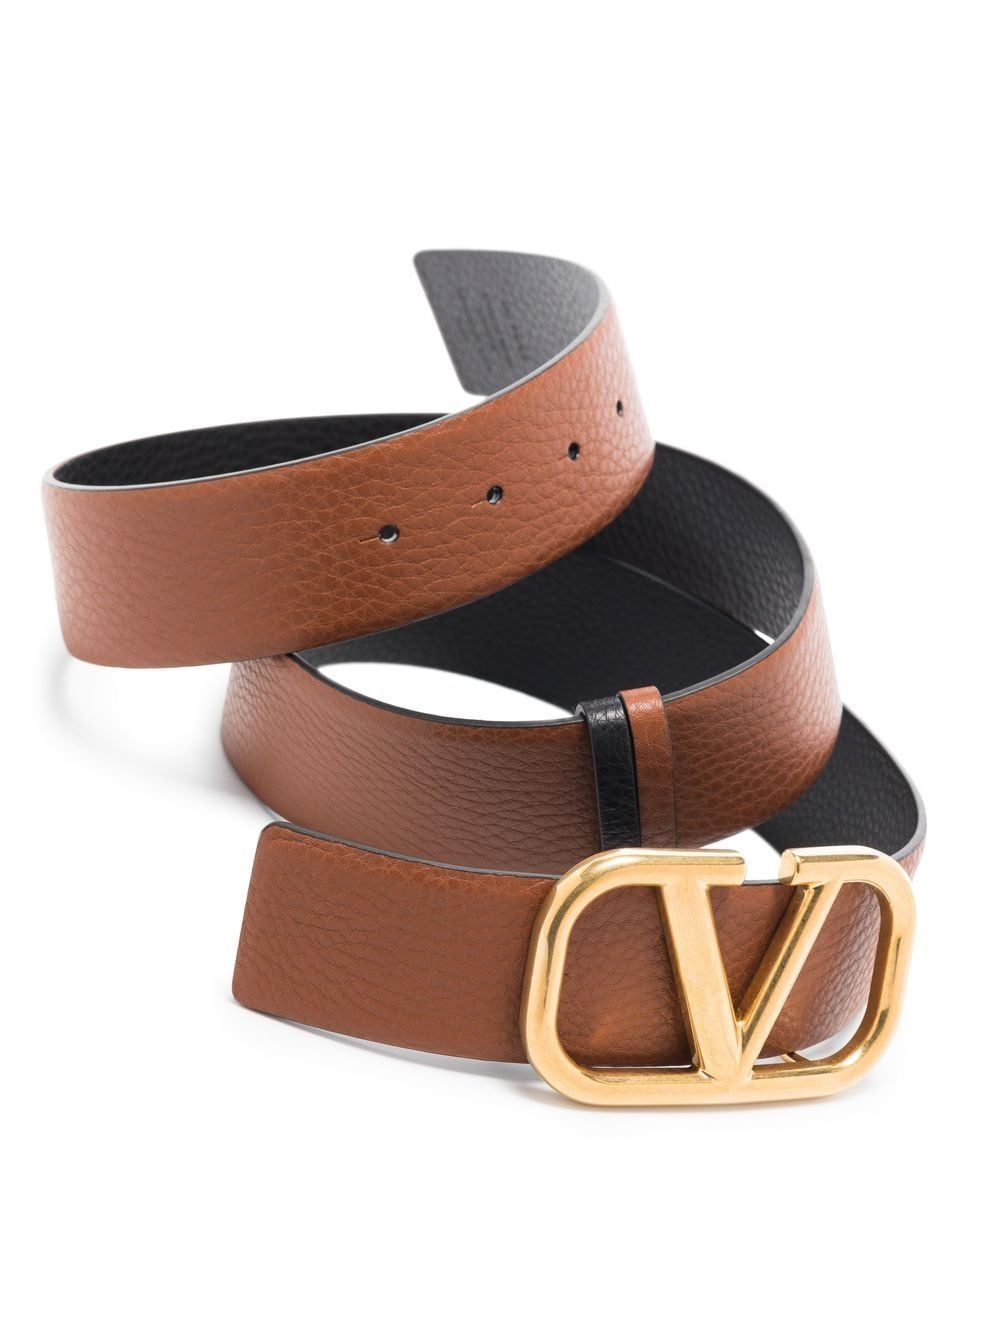 Reversible Buckle Belt for Men in Black with I Calf Leather - Bos Taurus